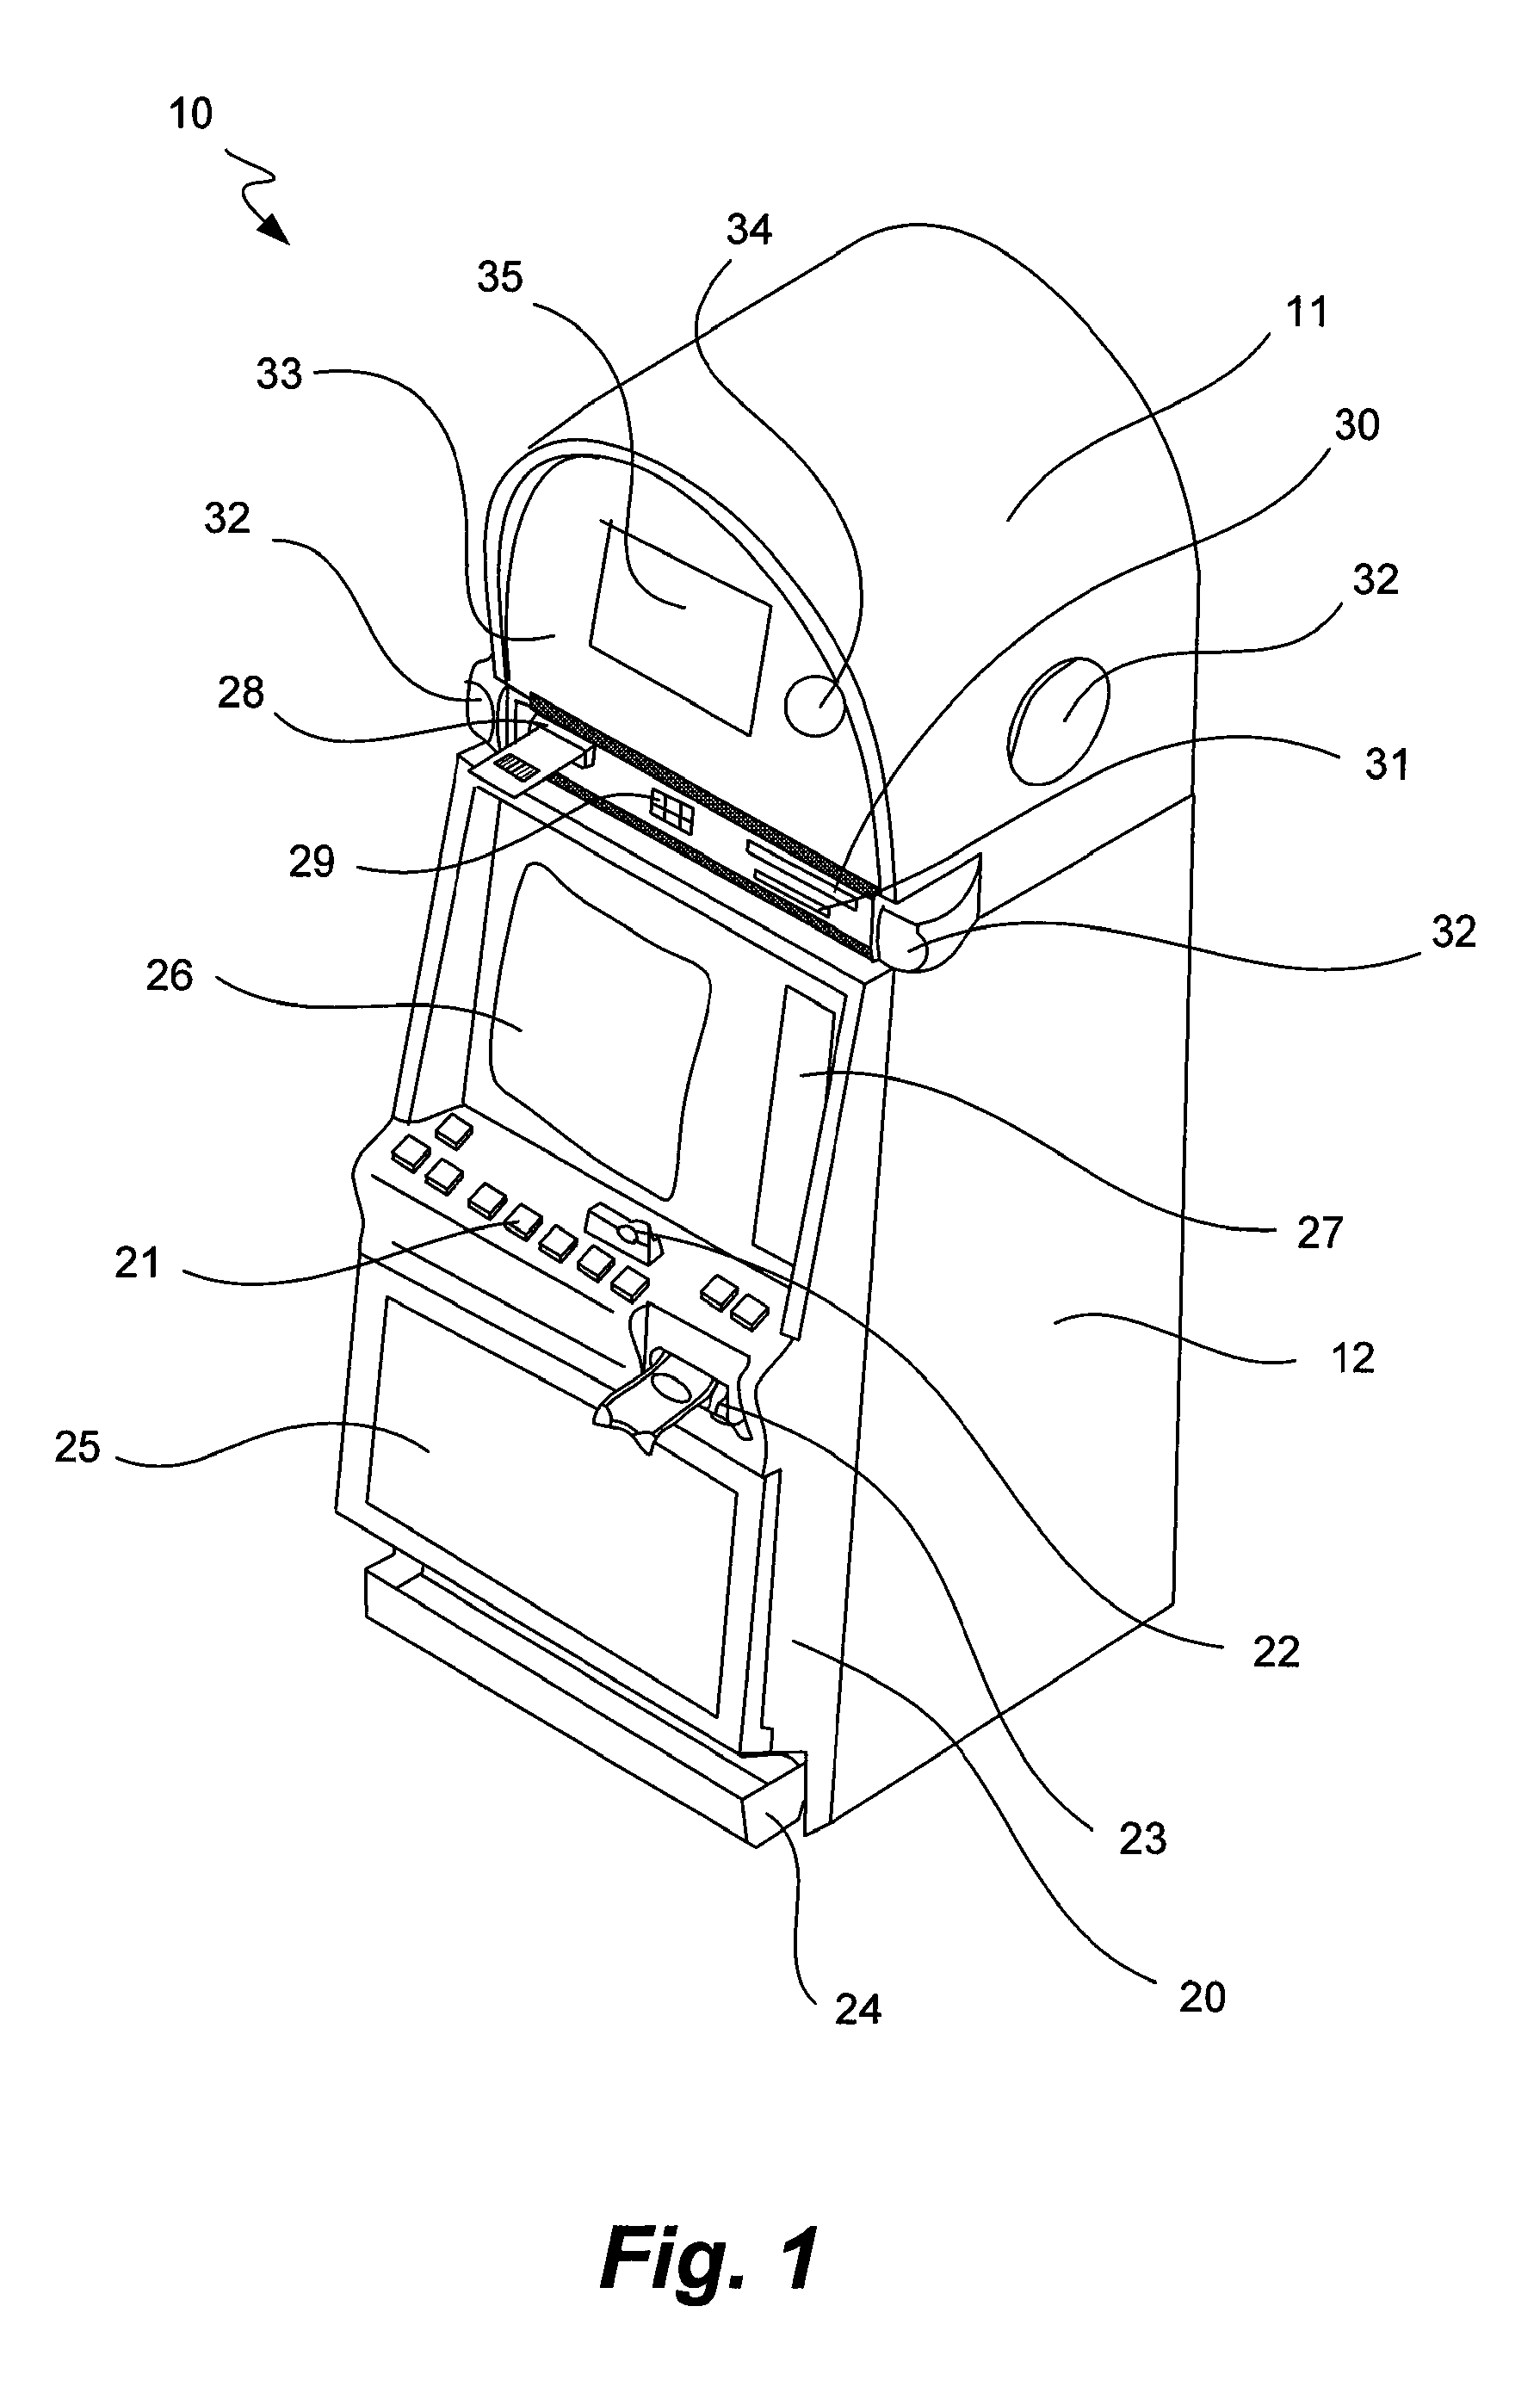 Casino Display methods and devices